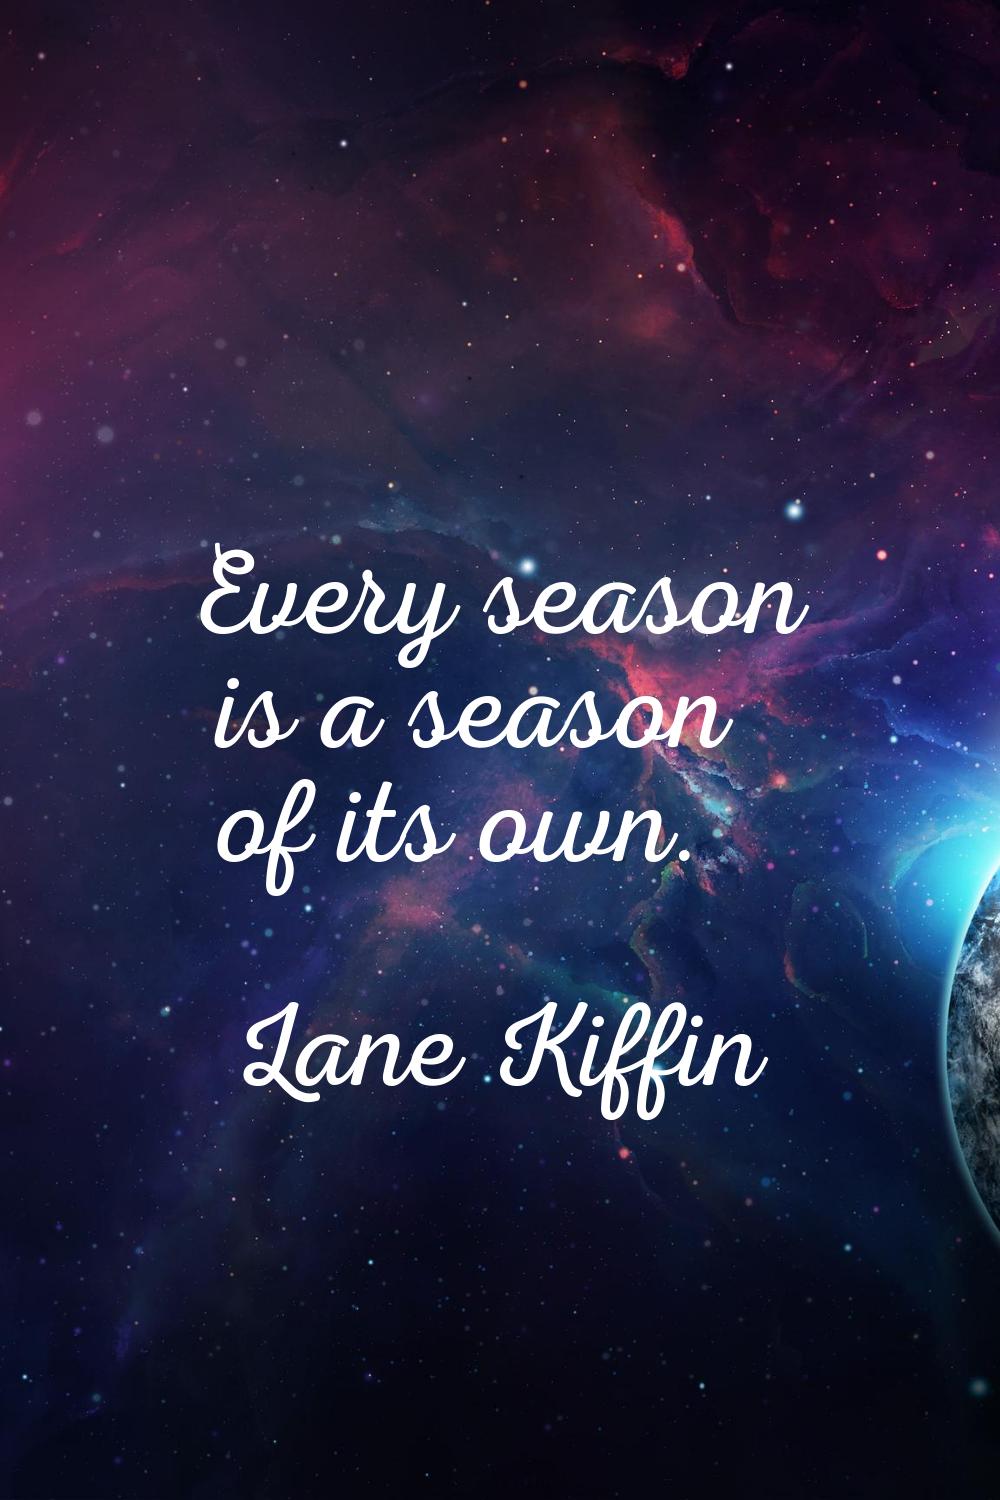 Every season is a season of its own.